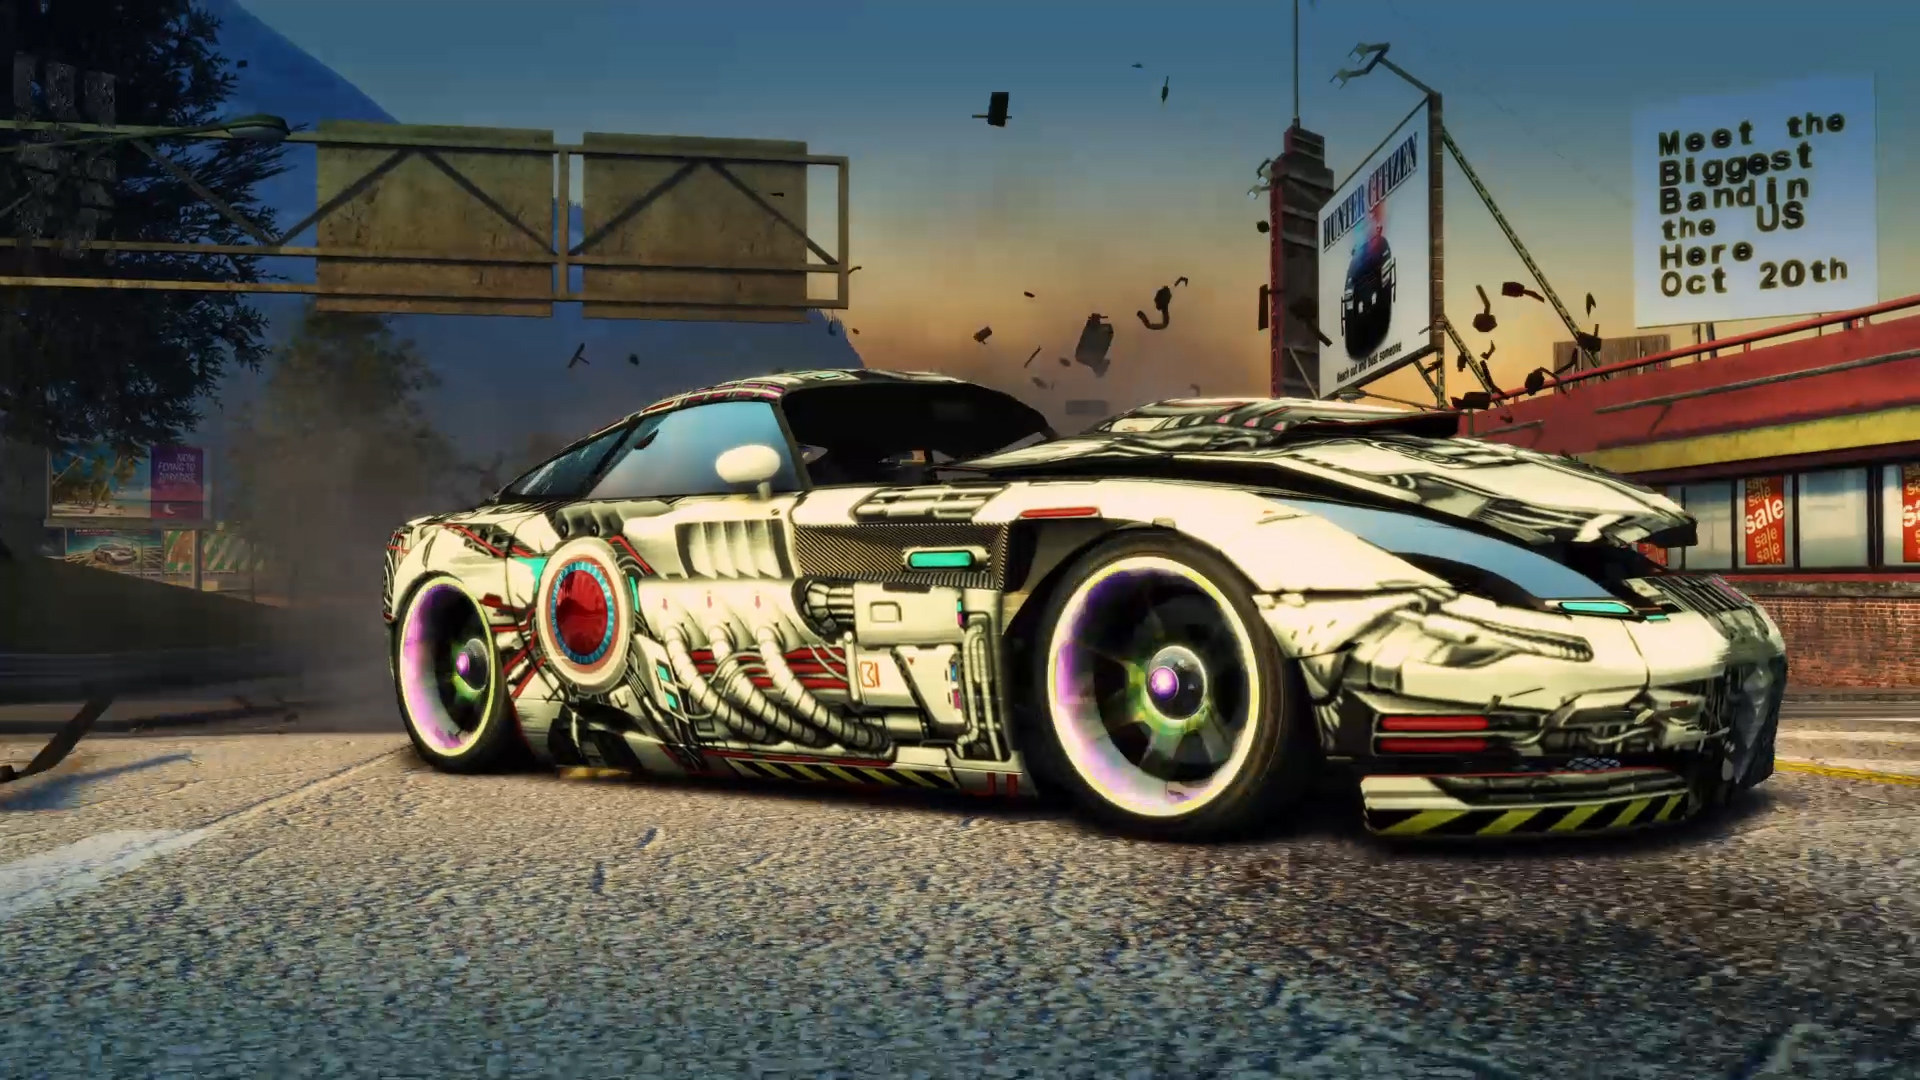 Burnout Paradise Didn’t Need A Remaster, But It’s Nice